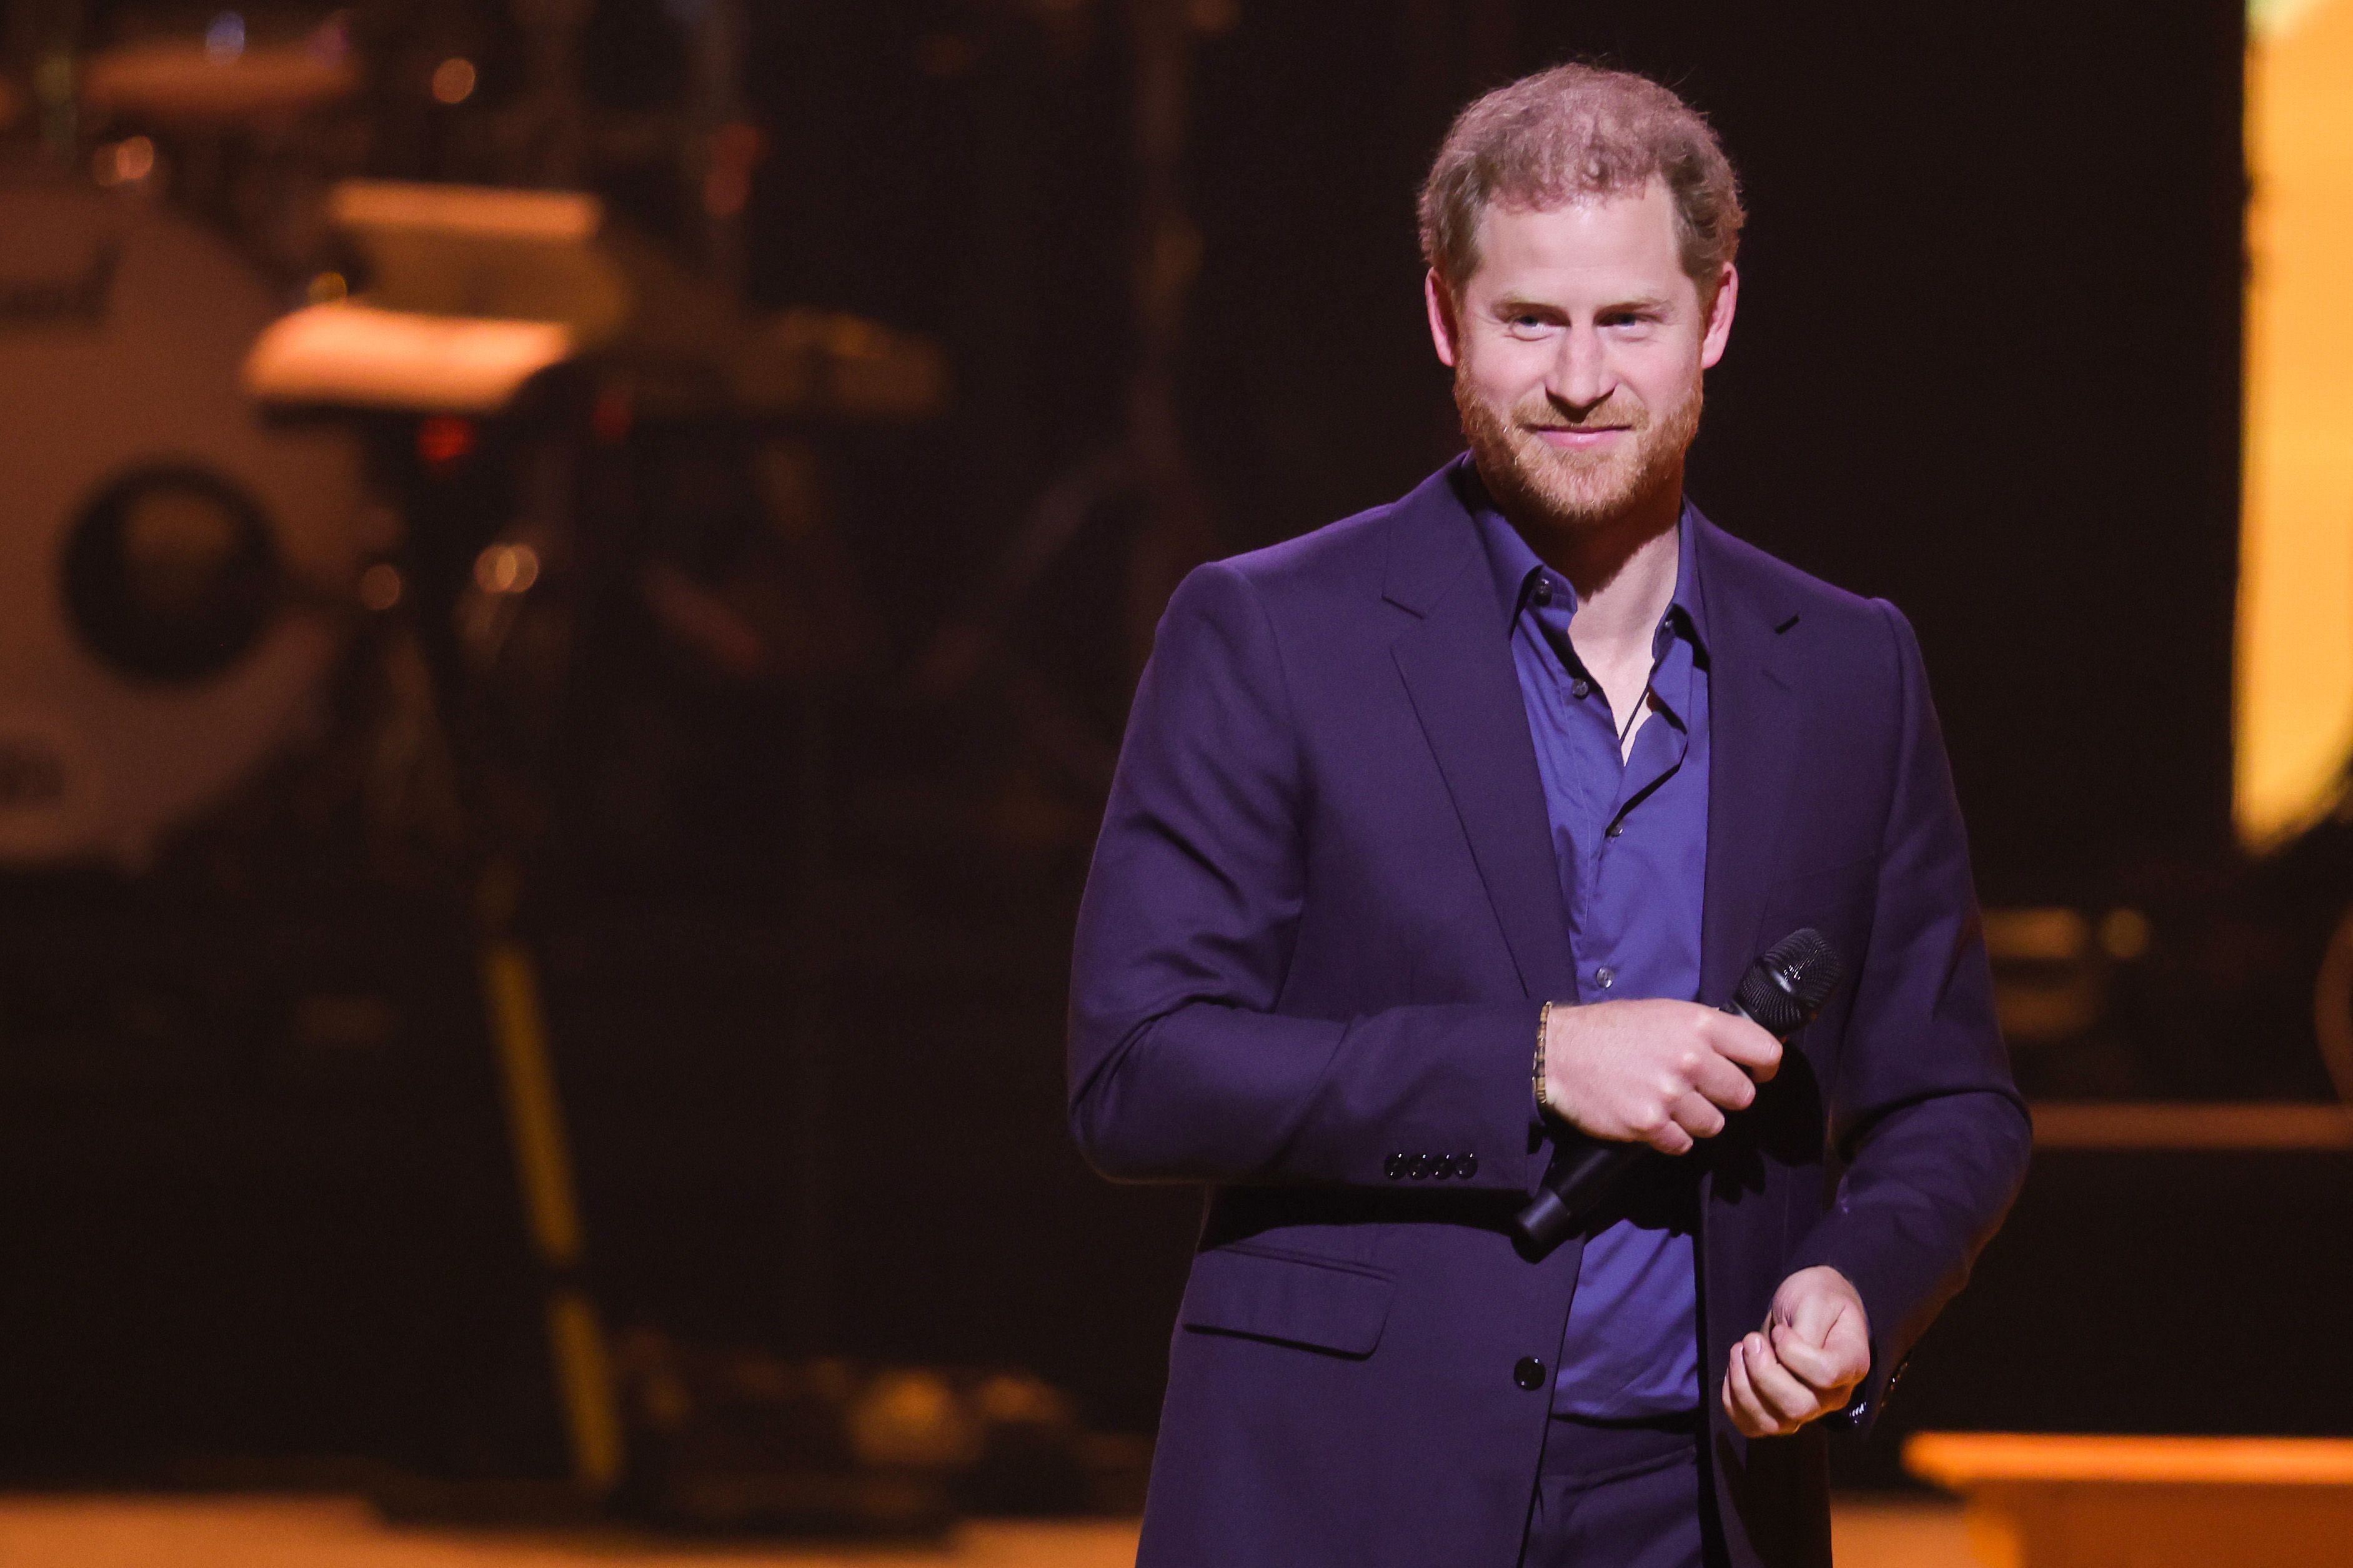 Prince Harry, who signaled he won't be attending the Queen's Platinum Jubliee Celebration, speaks on stage during the Invictus Games Closing Ceremony